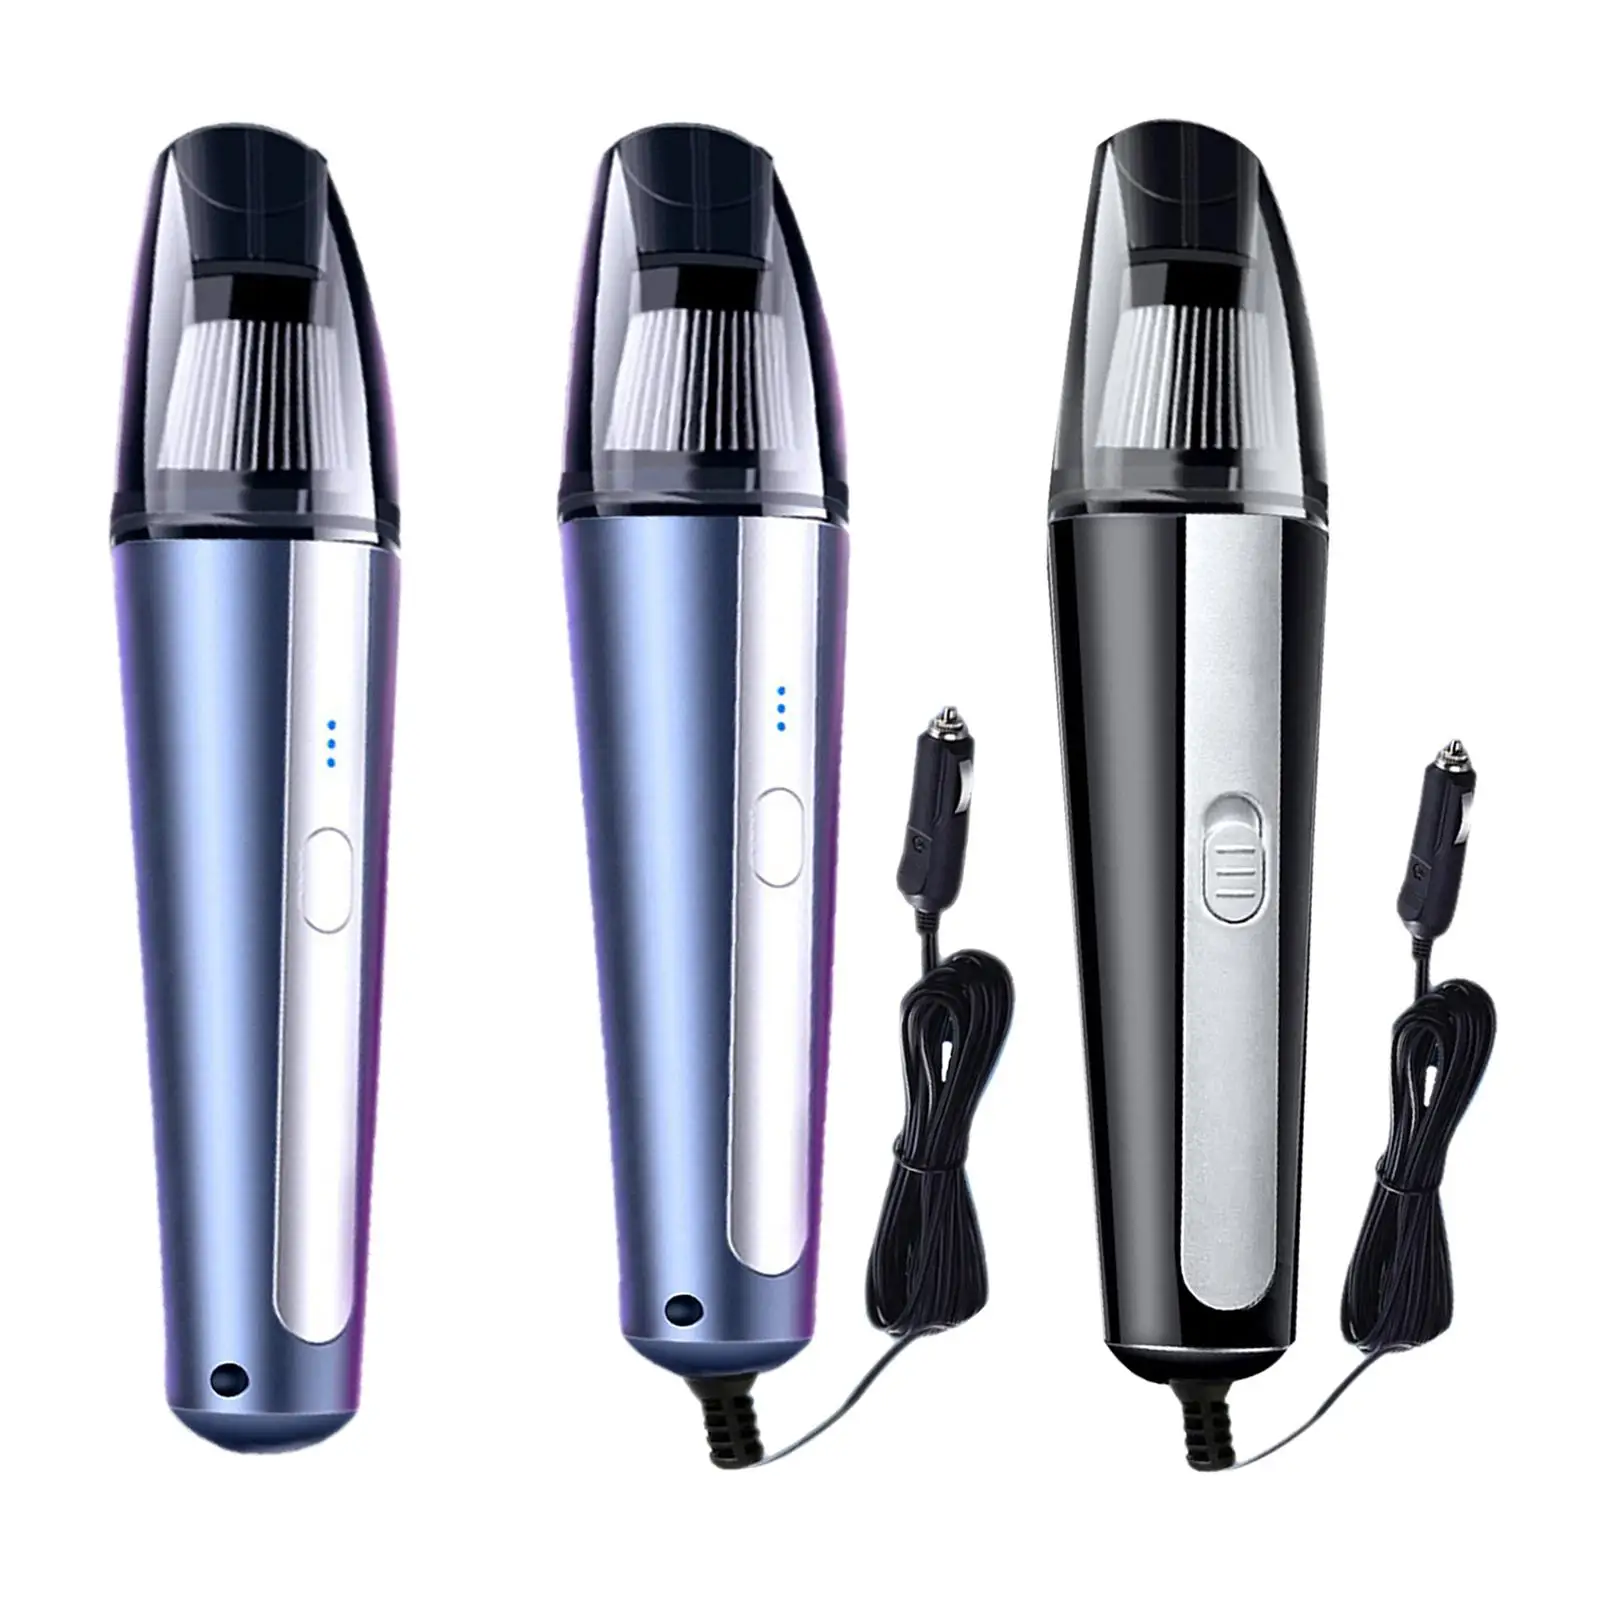 Handheld Cars Vacuum Cleaner 6000PA and Wet Use Removable Portable Cyclone Suction for , Seats ,Chairs ,Household Supplies